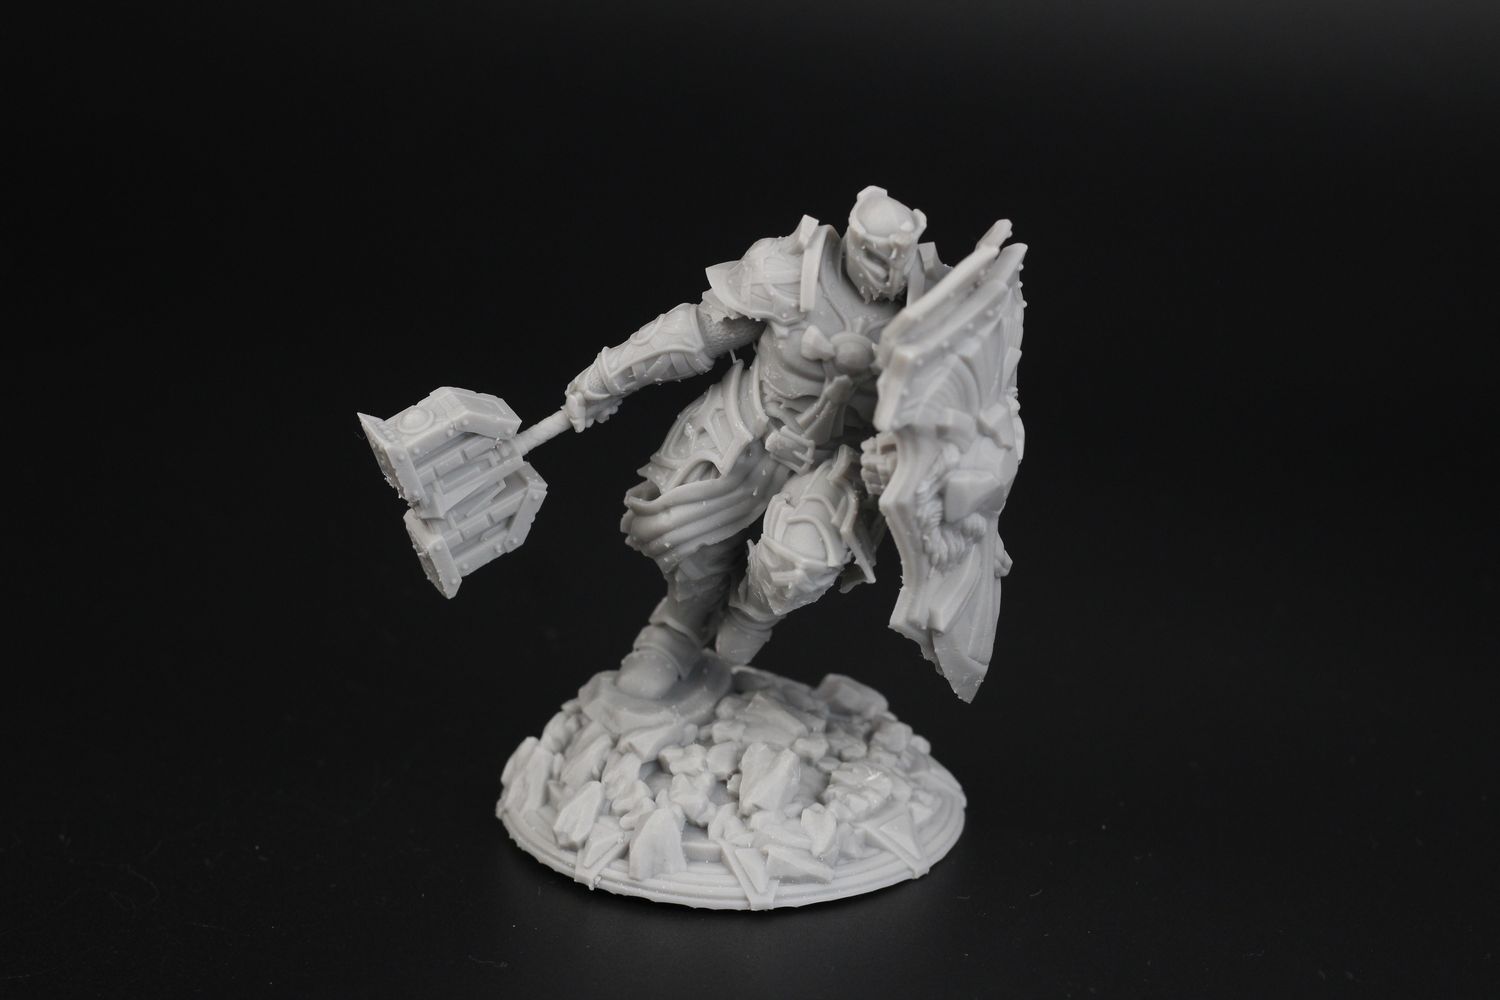 Pre Sliced Miniature on Halot Mage Pro5 1 | Creality Halot Mage Pro Review: Great Prints, Bad Software